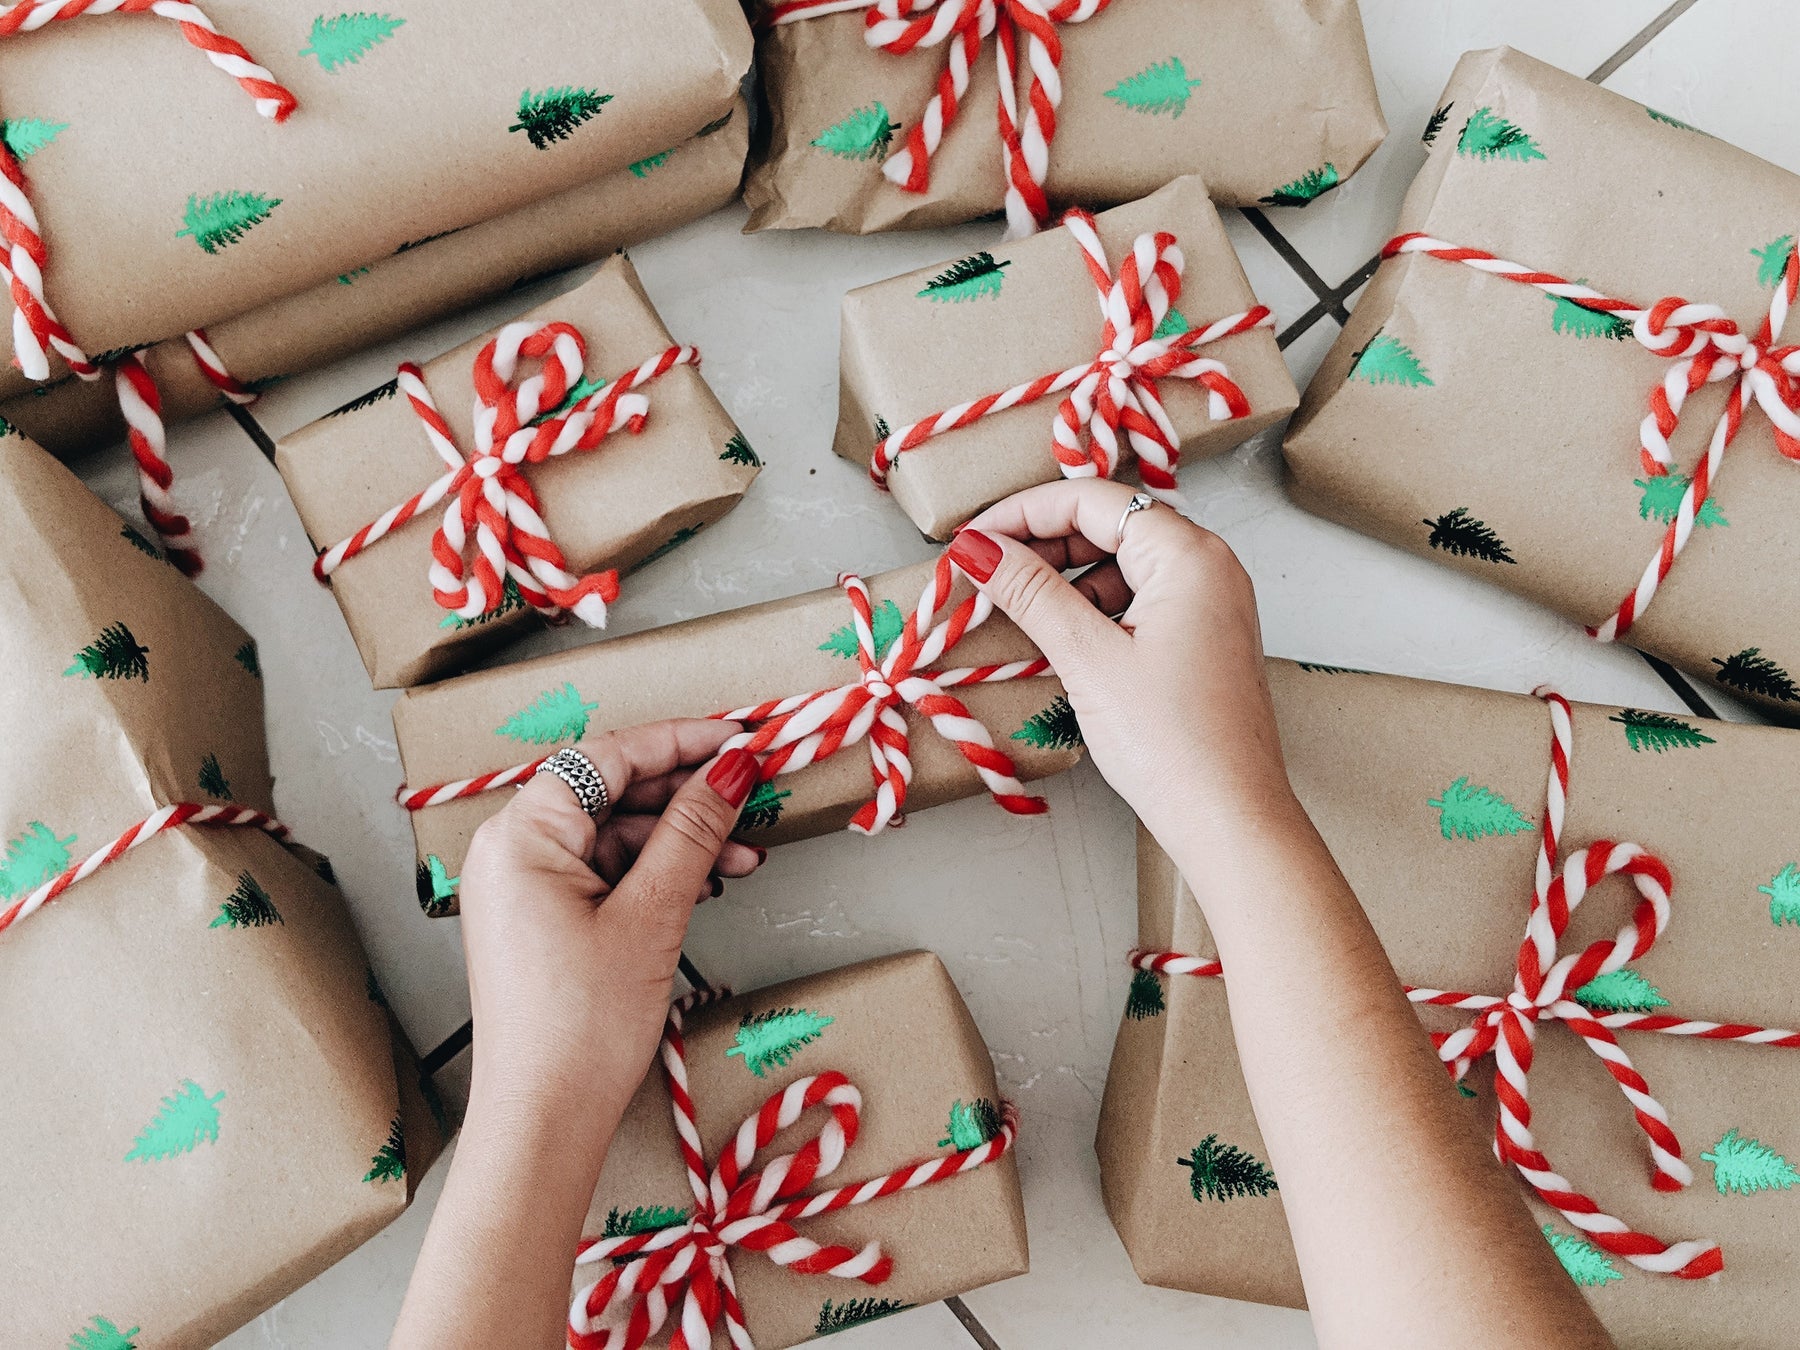 person wrapping christmas gifts. wrapping paper is tan coloured with green foil trees and tied up with candy cane patterned string